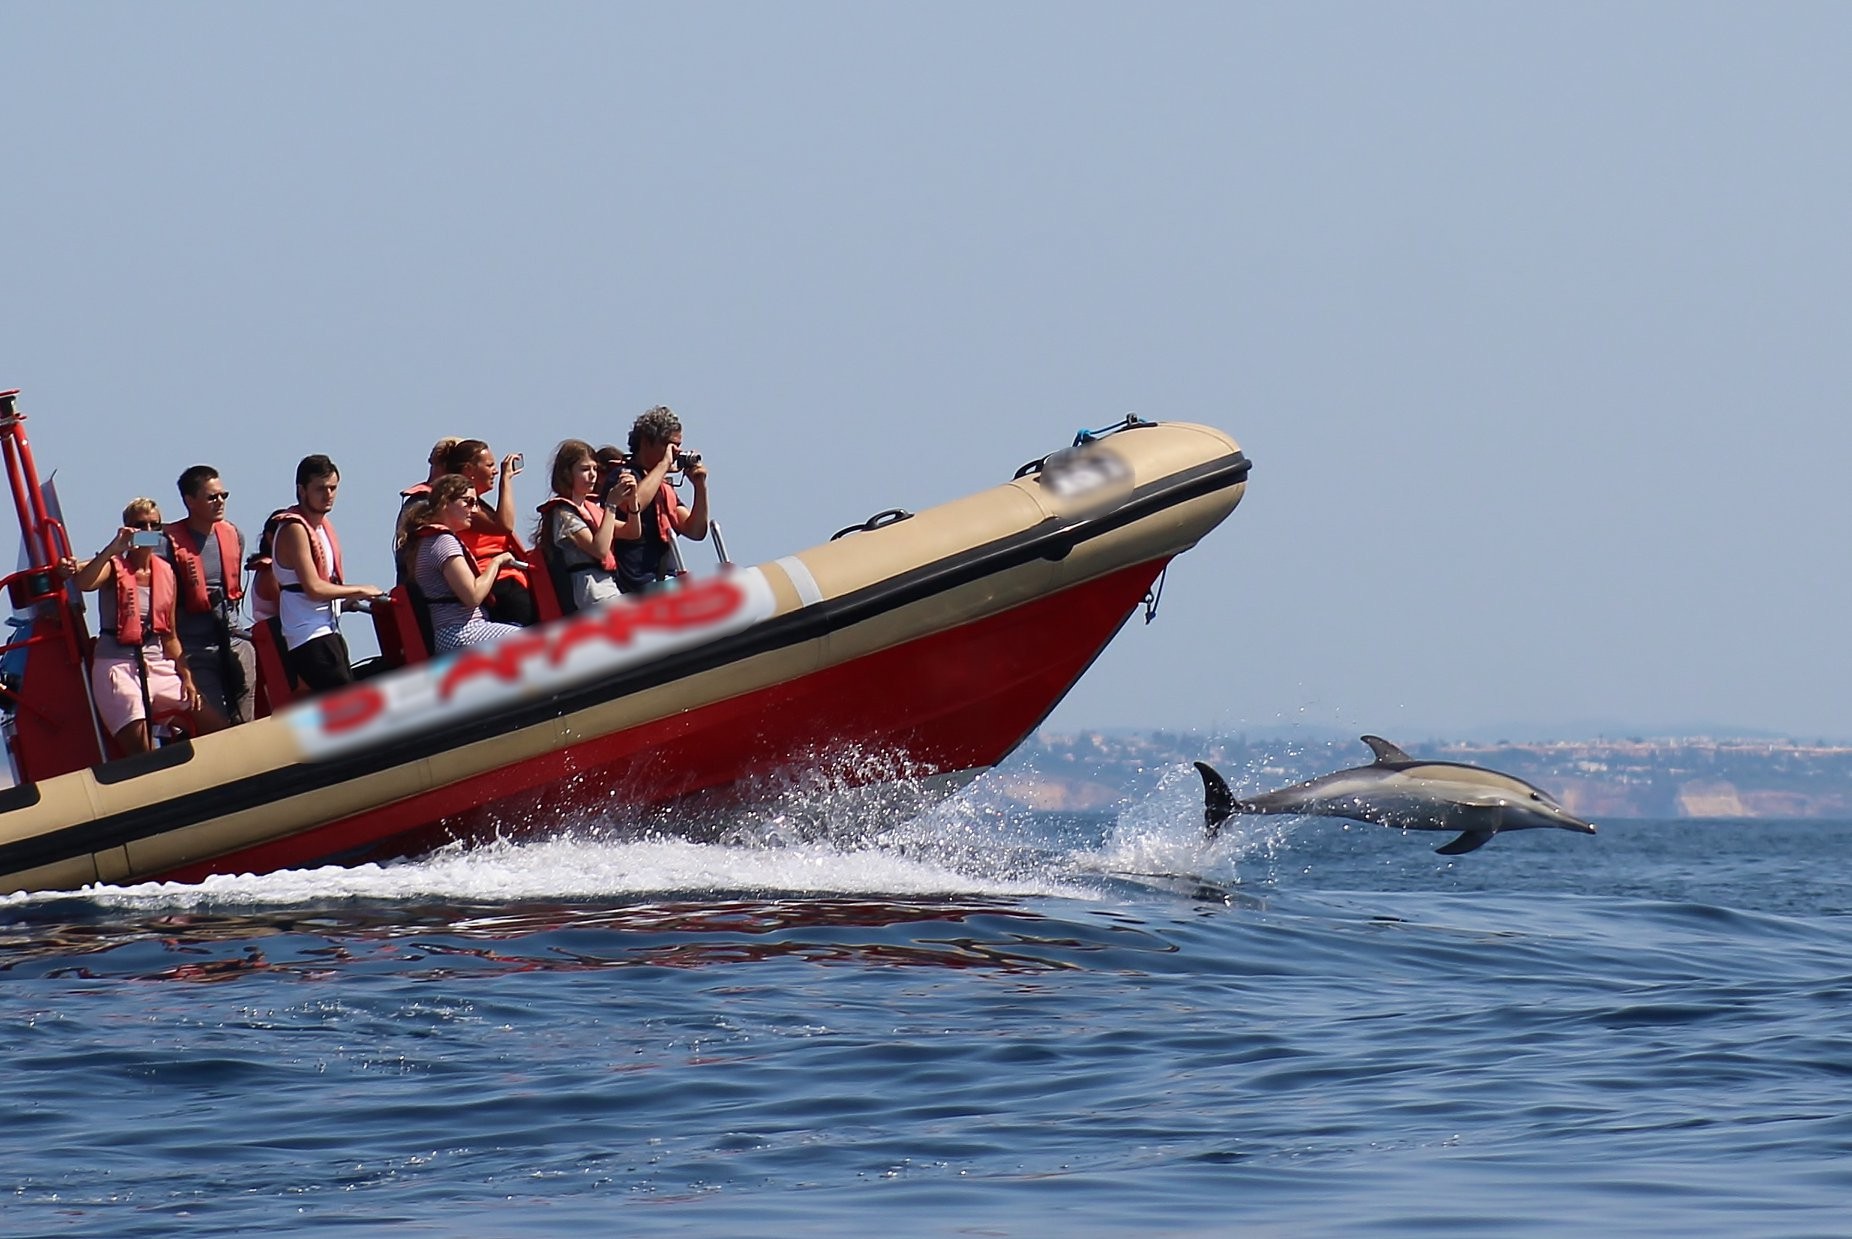 Dolphin watching from Portimão Marina